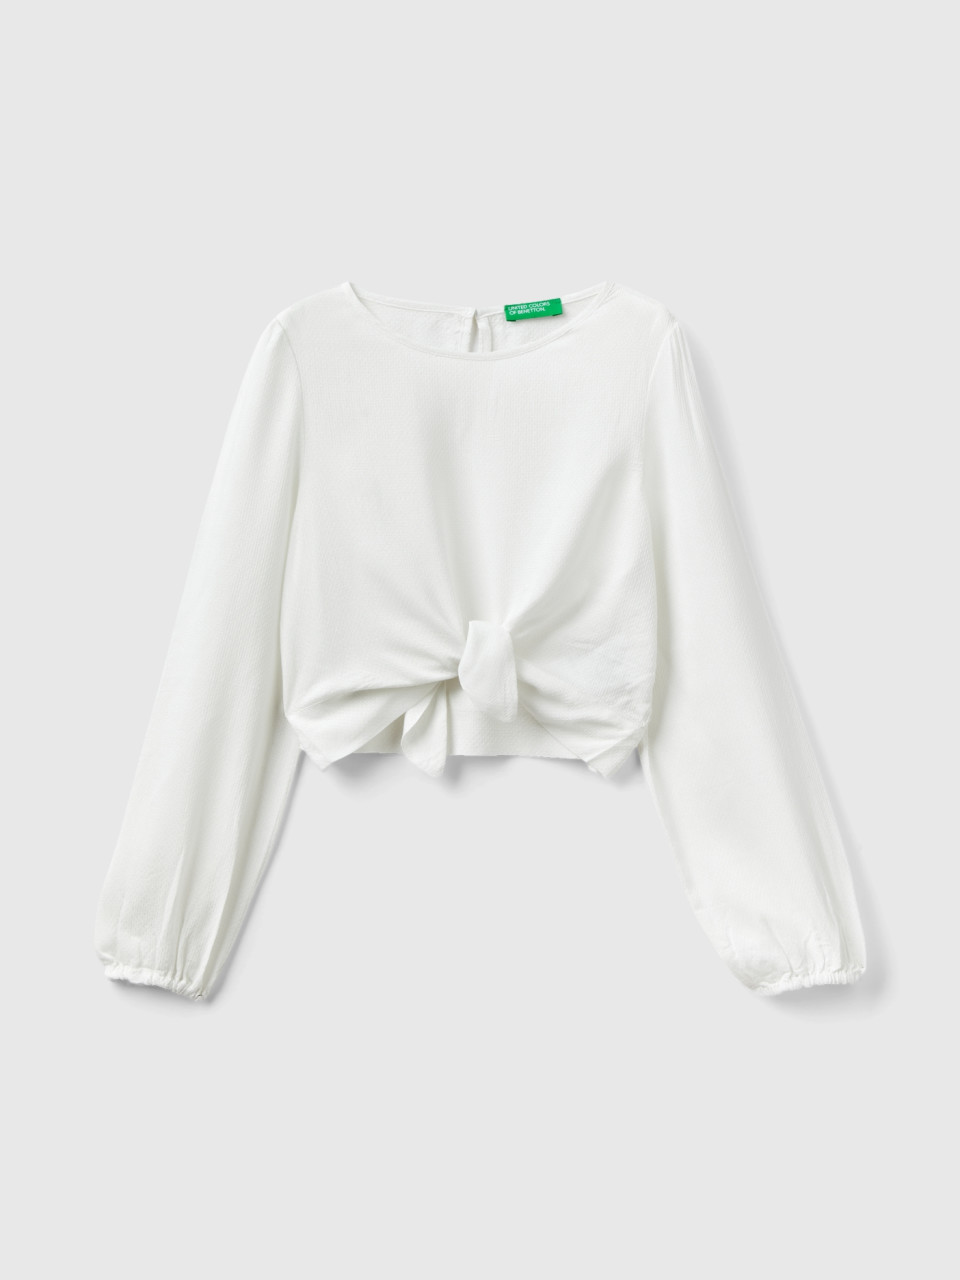 Benetton, Cropped Blouse With Knot, Creamy White, Kids